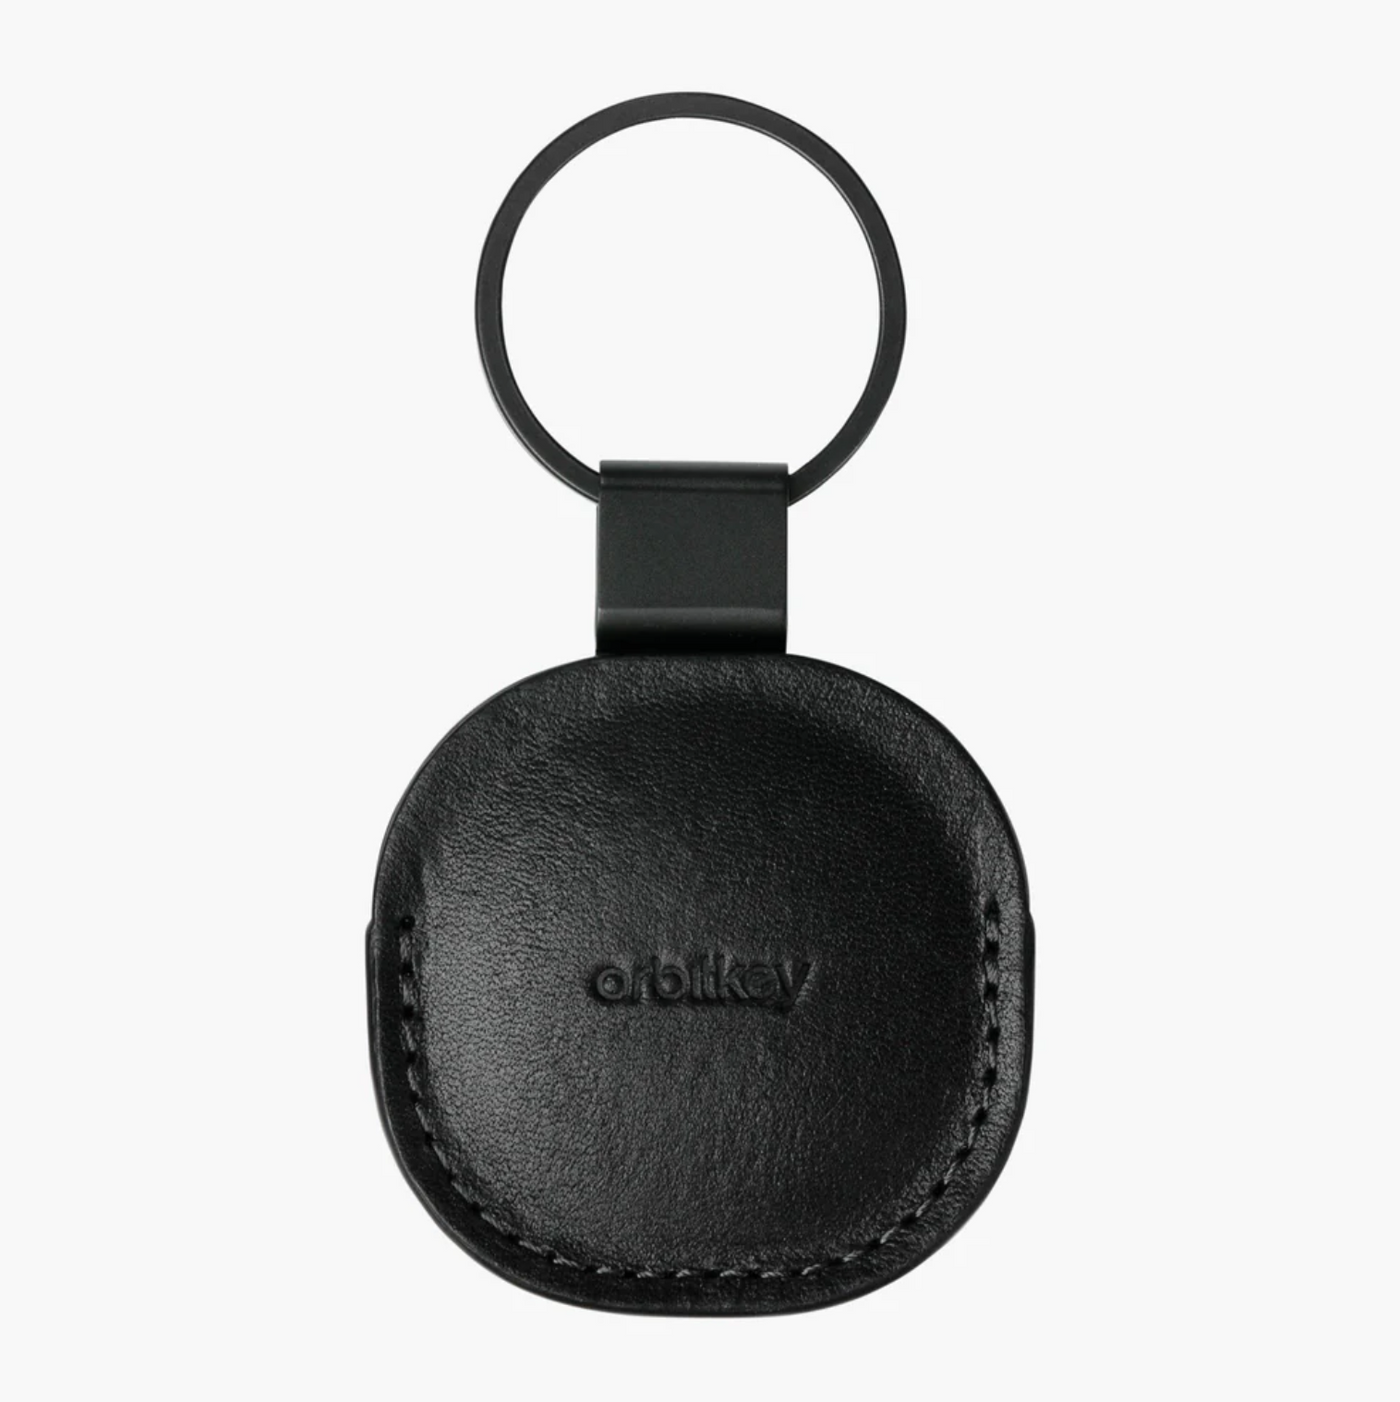 Orbitkey - Leather Holder for AirTag - Black